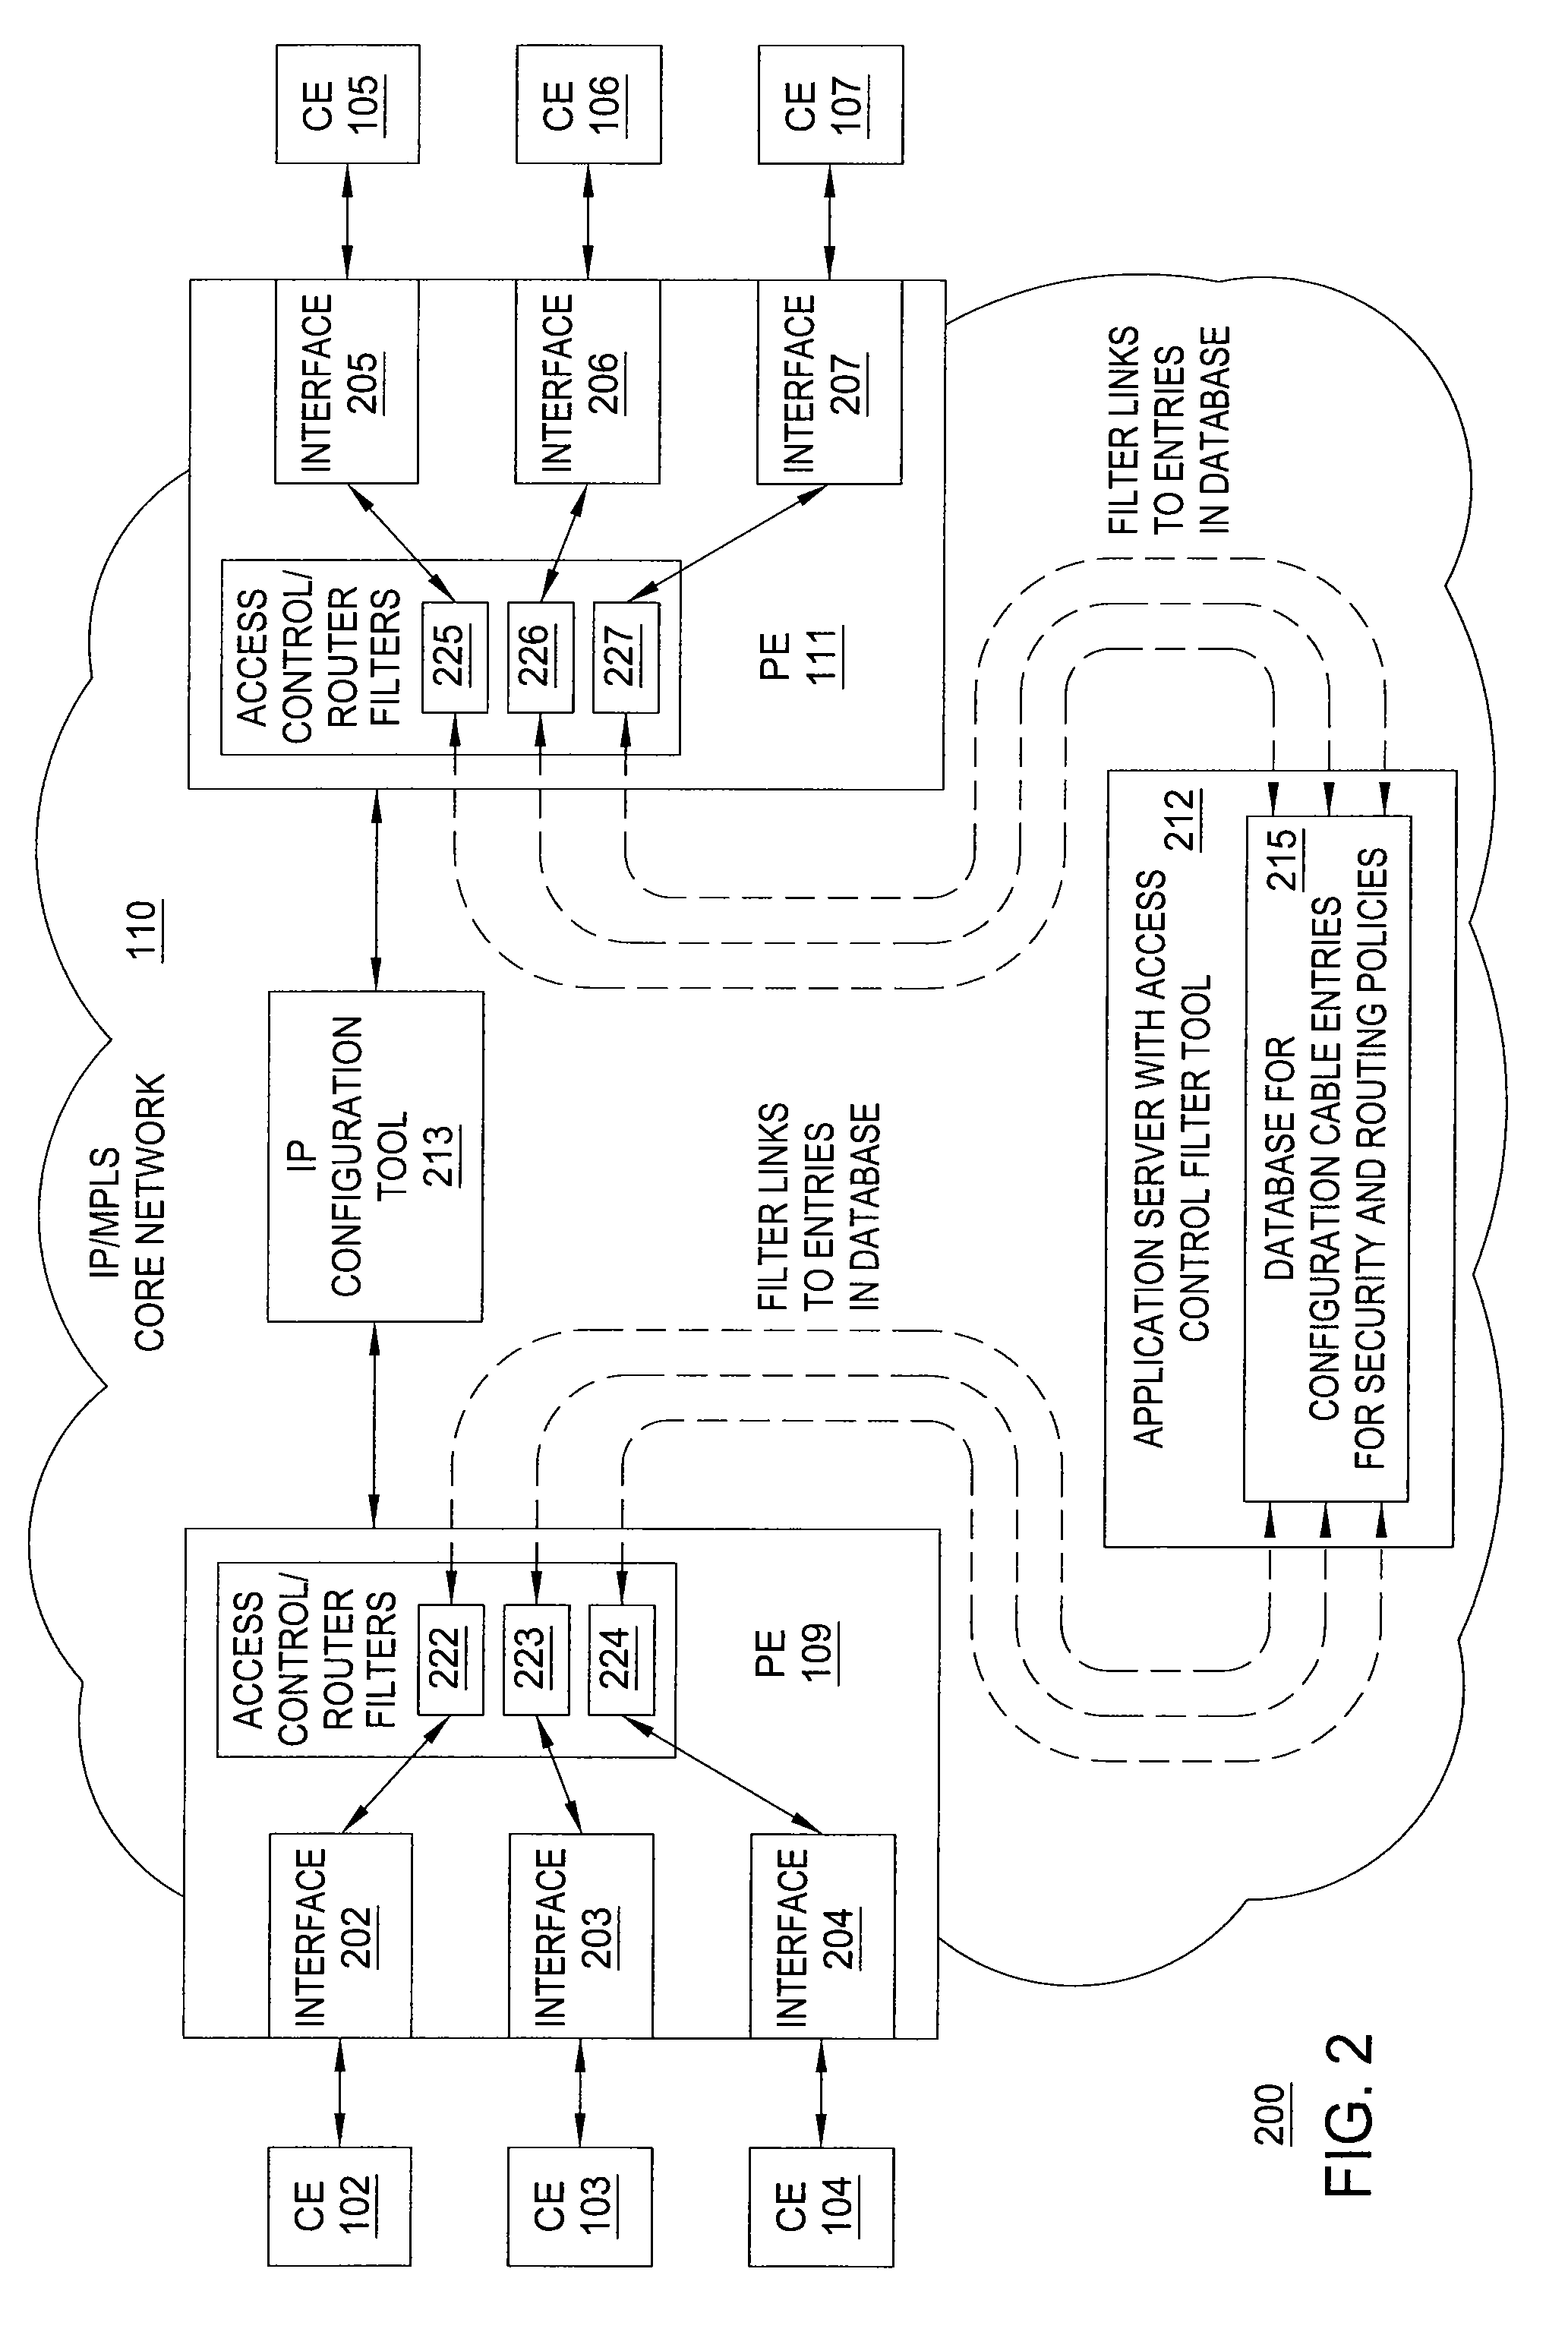 Method and apparatus for providing routing and access control filters